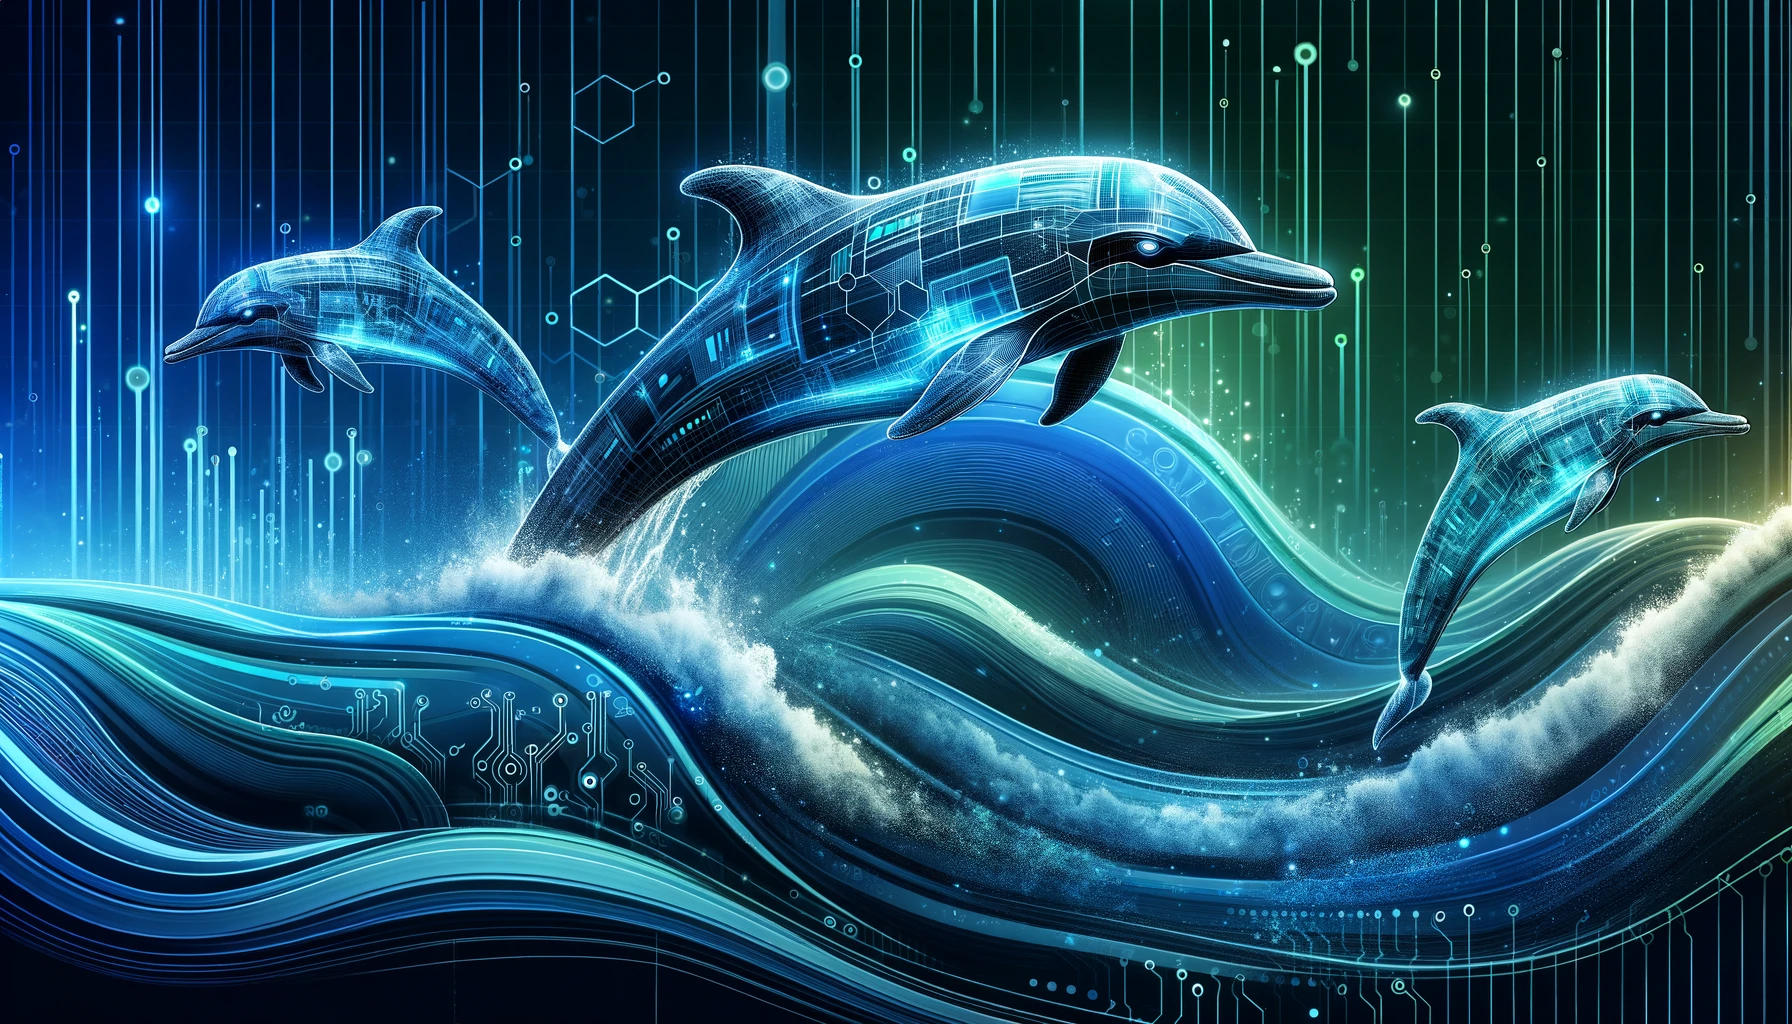 laser_dolphin_image